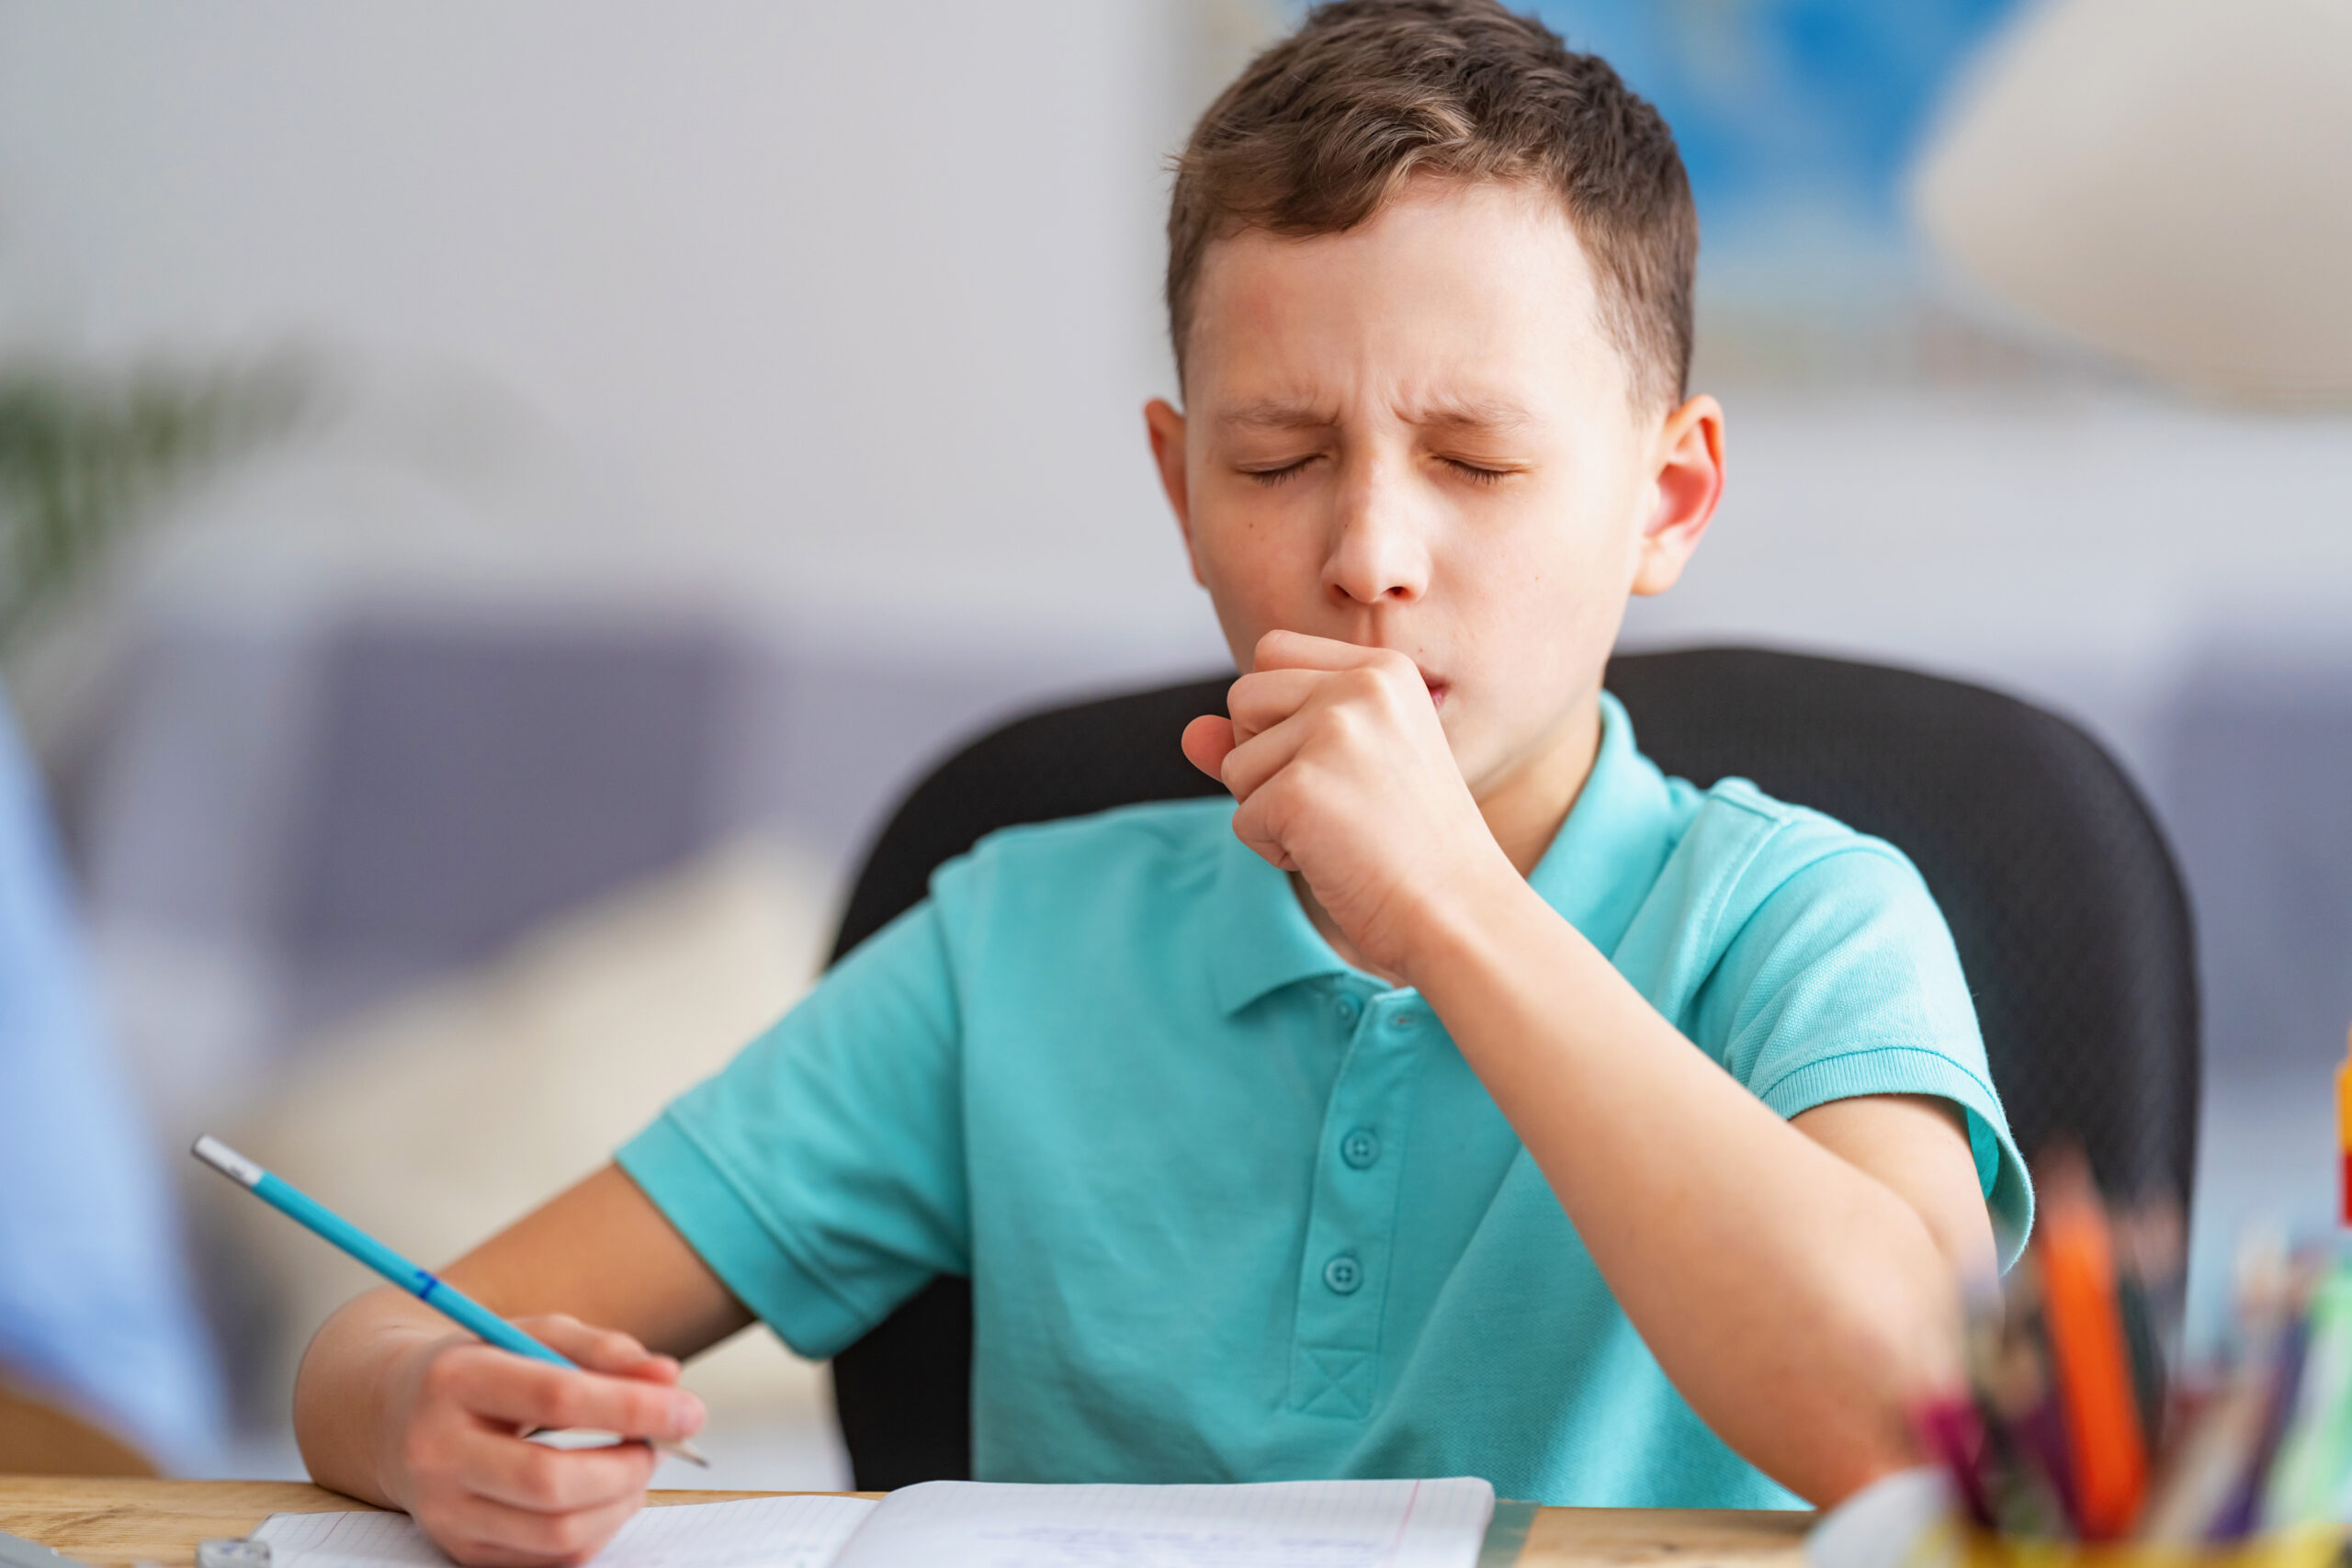 Boy at school coughing as he writes